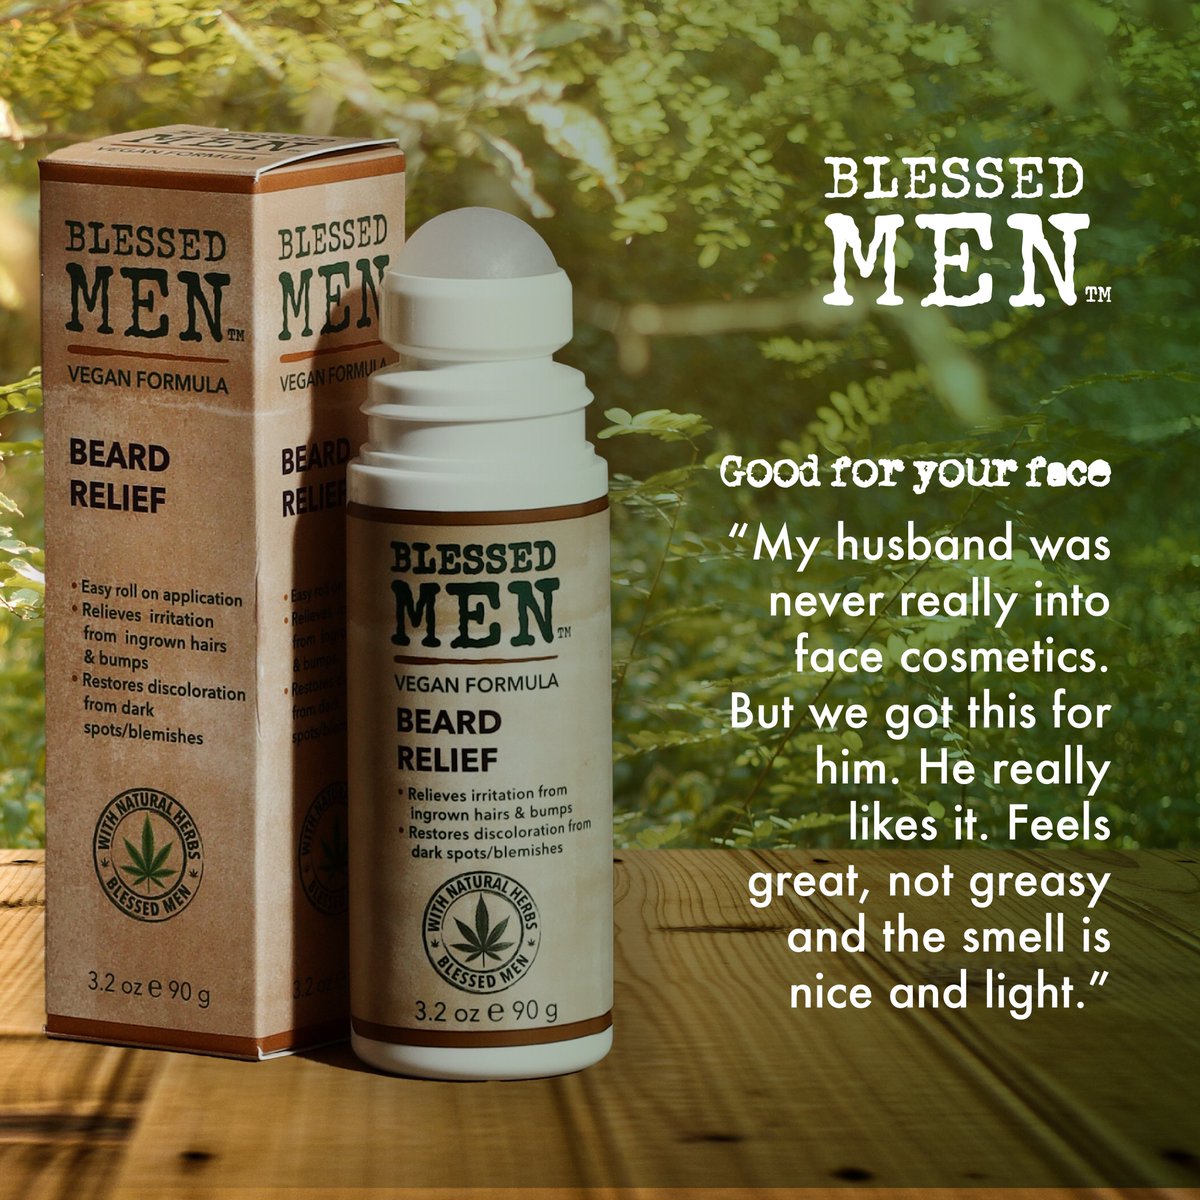 “Good for Your Face”

Blessed Men is here to take care of your face and beard without the hassle of a super intricate routine 🧔‍♂️
.
.
#BeardCare #BeardButter #BeardWash #VeganProducts🌱 #veganbeard #BeardedMan #BeardItch #BeardLover #Beards #BeardOil